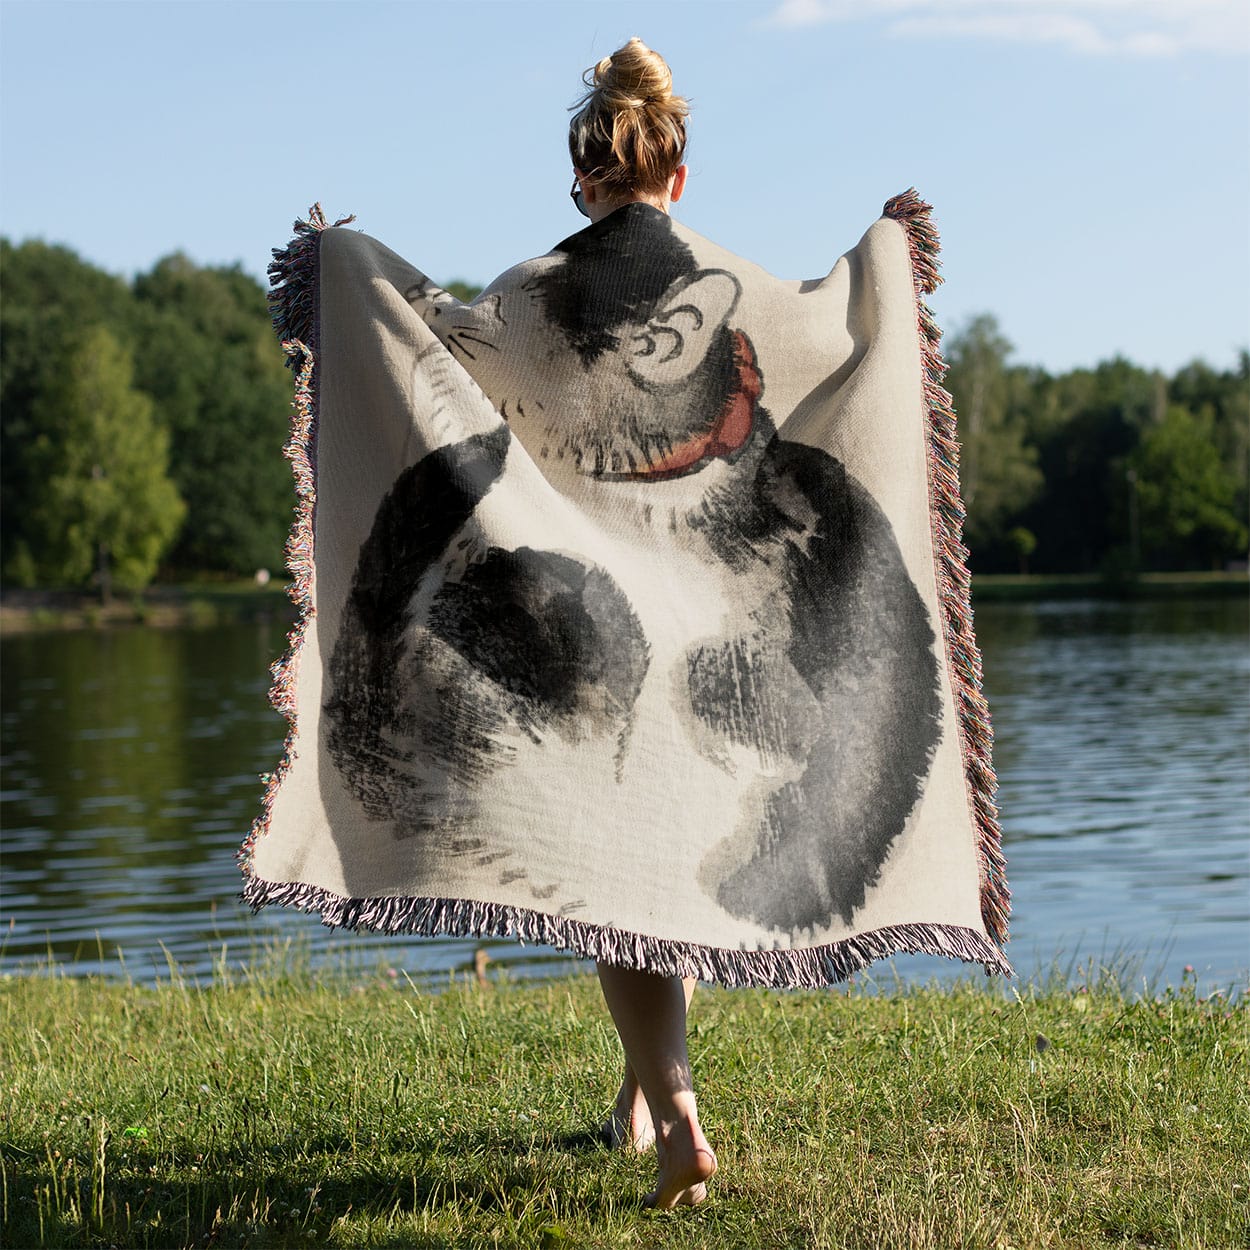 Japanese Black and White Cat Woven Blanket Held on a Woman's Back Outside